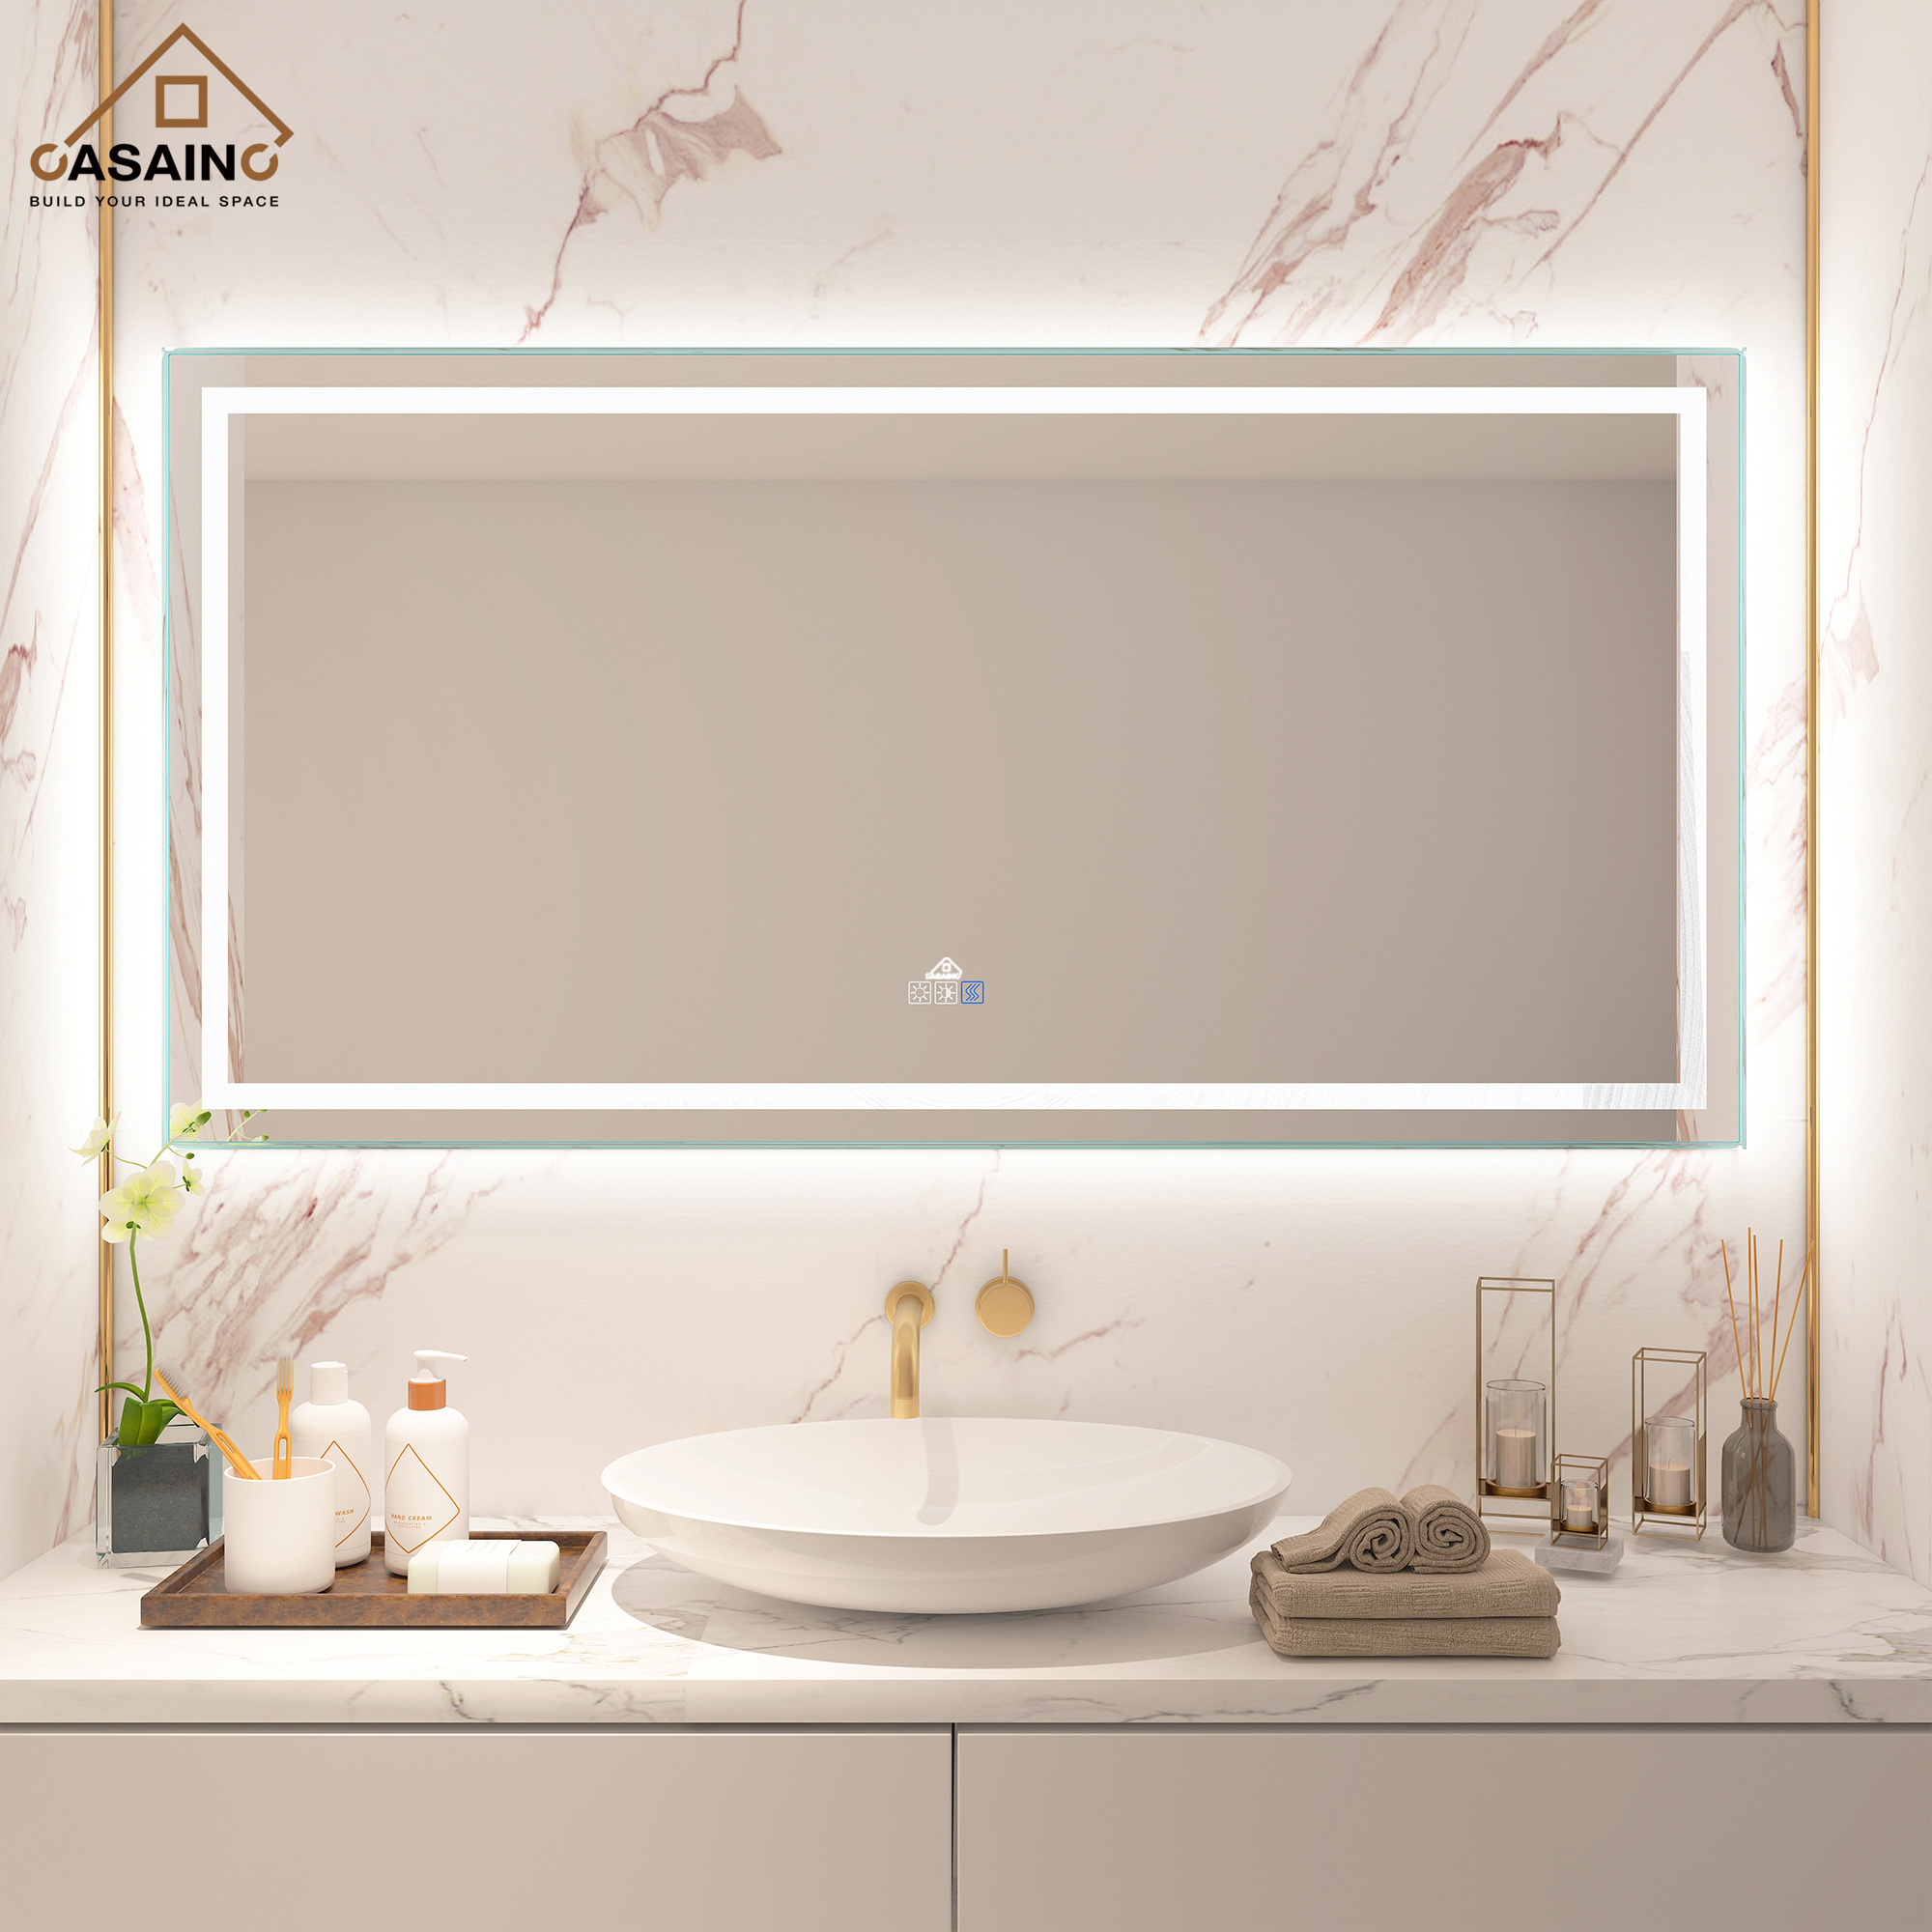 CASAINC Wall Mounted Modern LED Bathroom Mirror, Dimmable and Anti-Fog (72-in W × 36-in H)